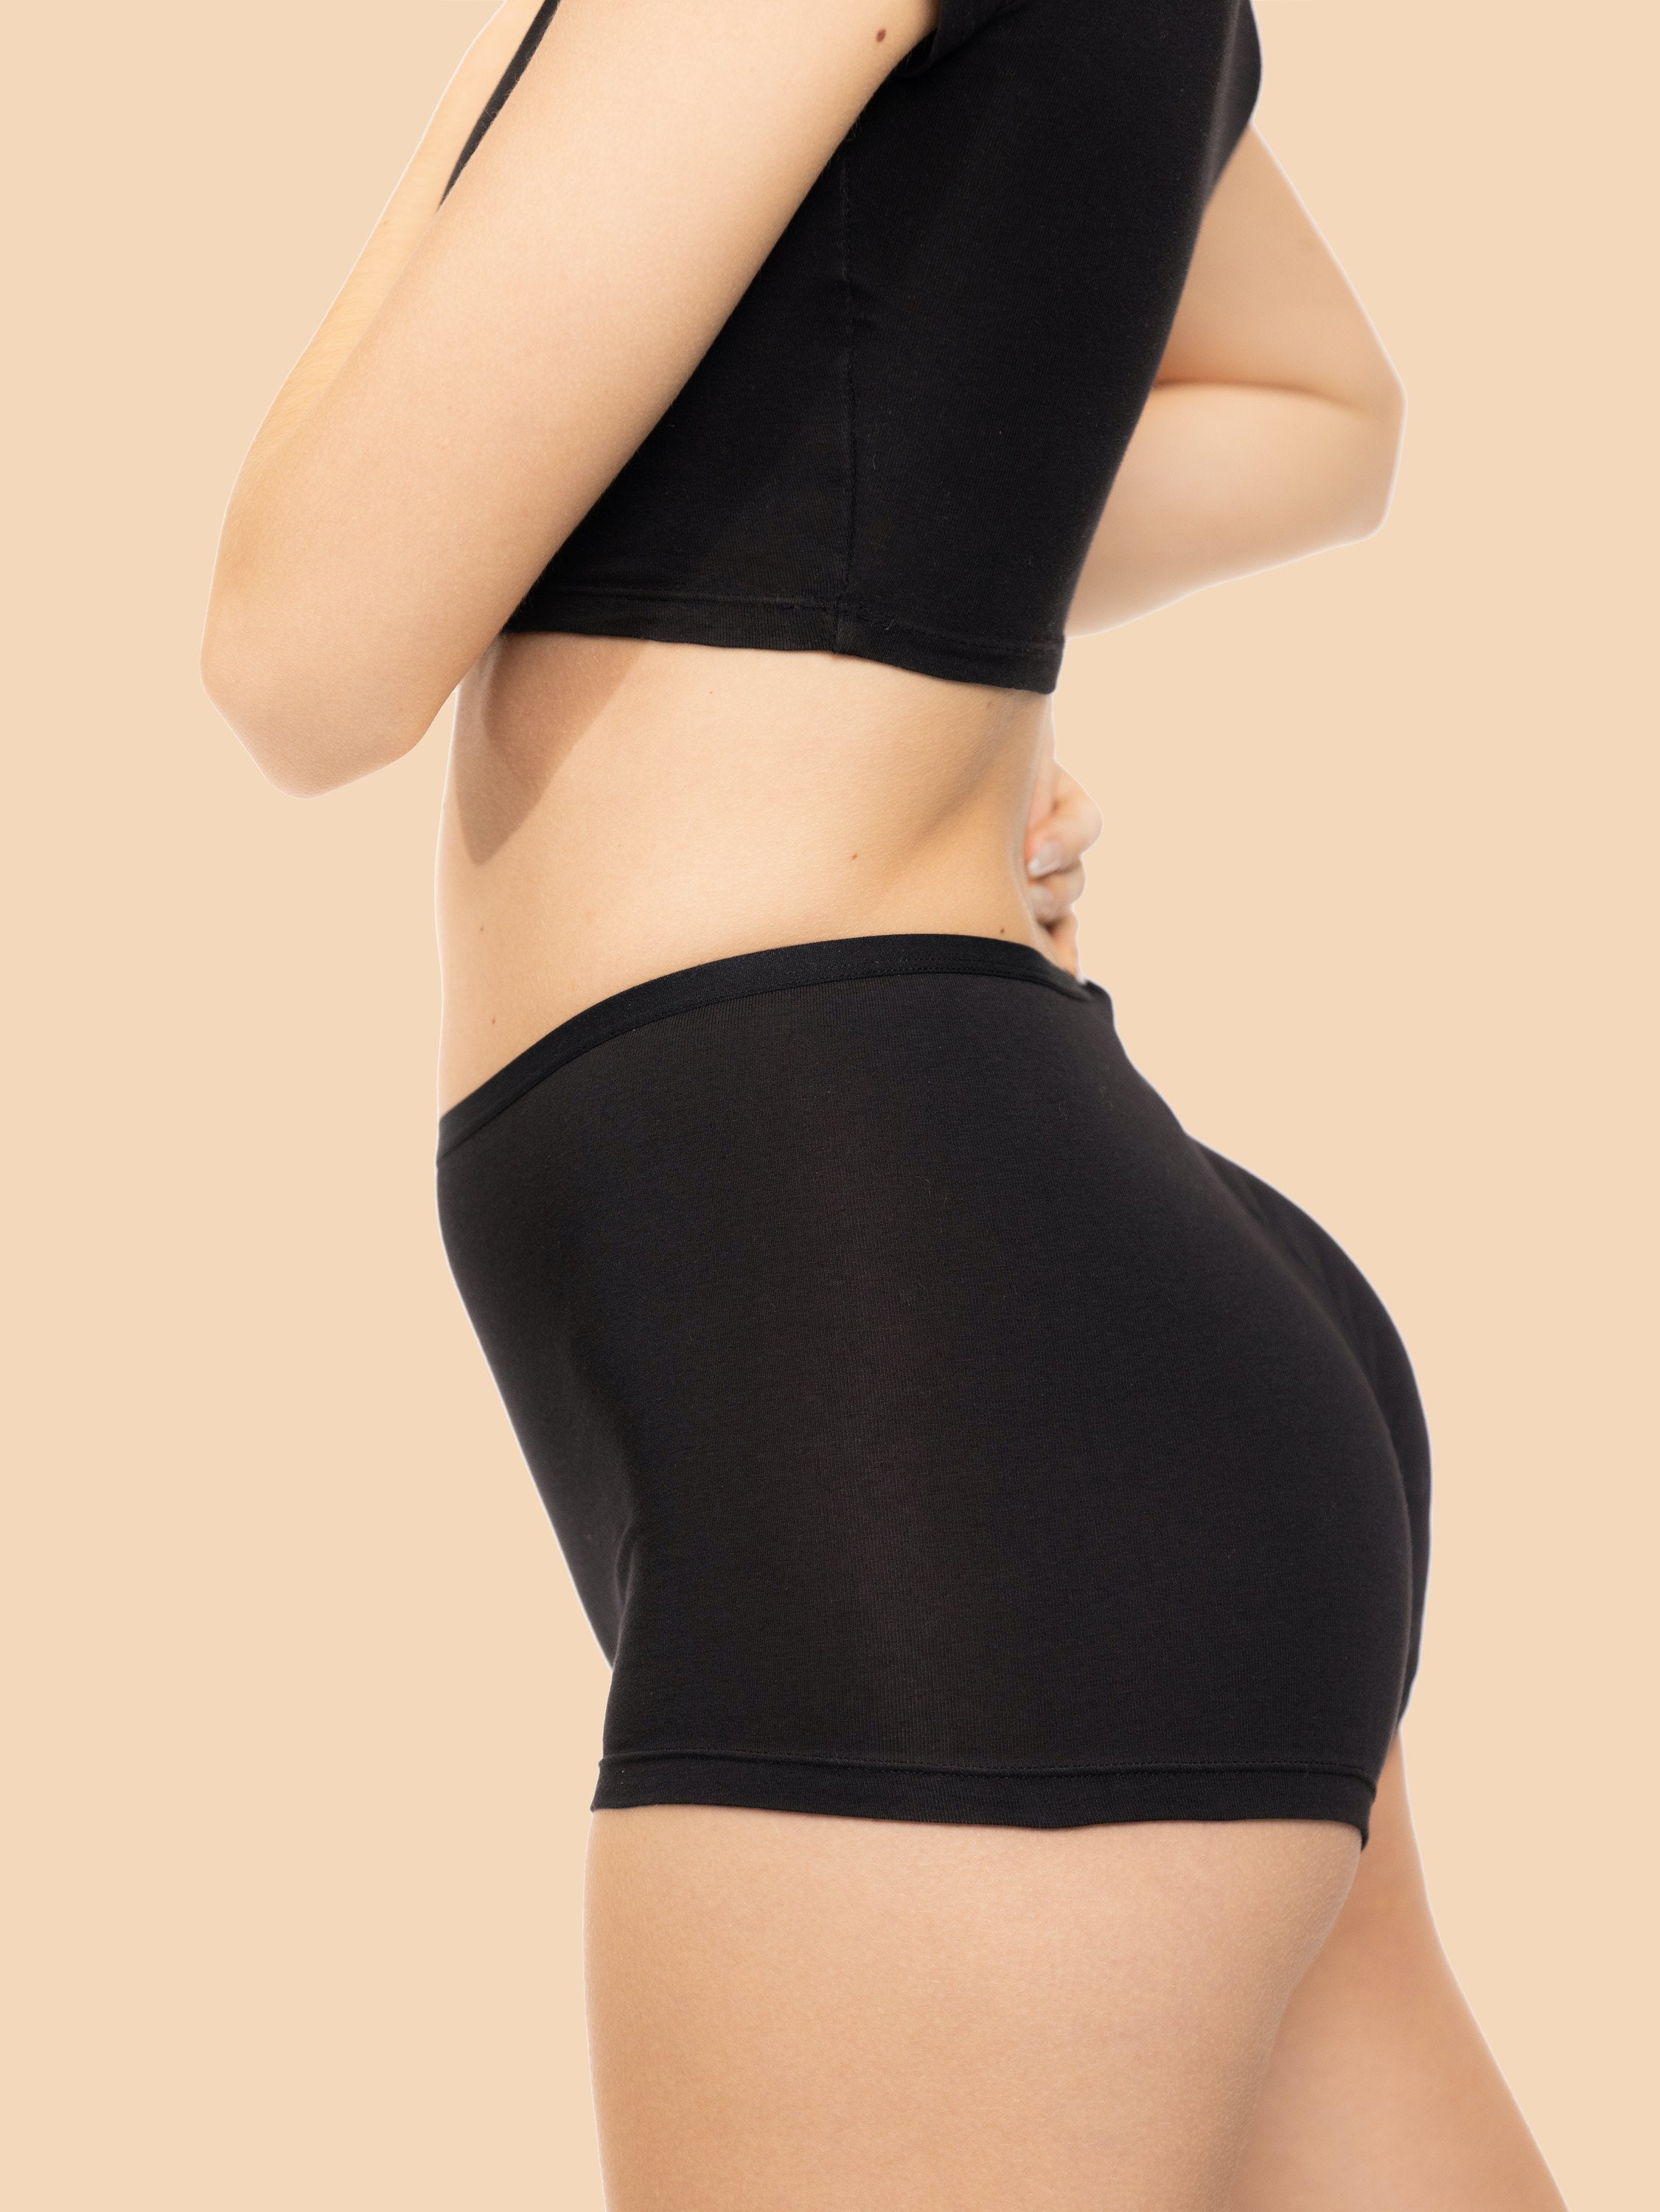 Shemsi Period Underwear - Reusable, Washable, Leak-proof and  Anti-bacterial, Cotton, Ultra Comfort, Strong plus Absorption, Alexandria  .Black. XXXL: Buy Online at Best Price in Egypt - Souq is now